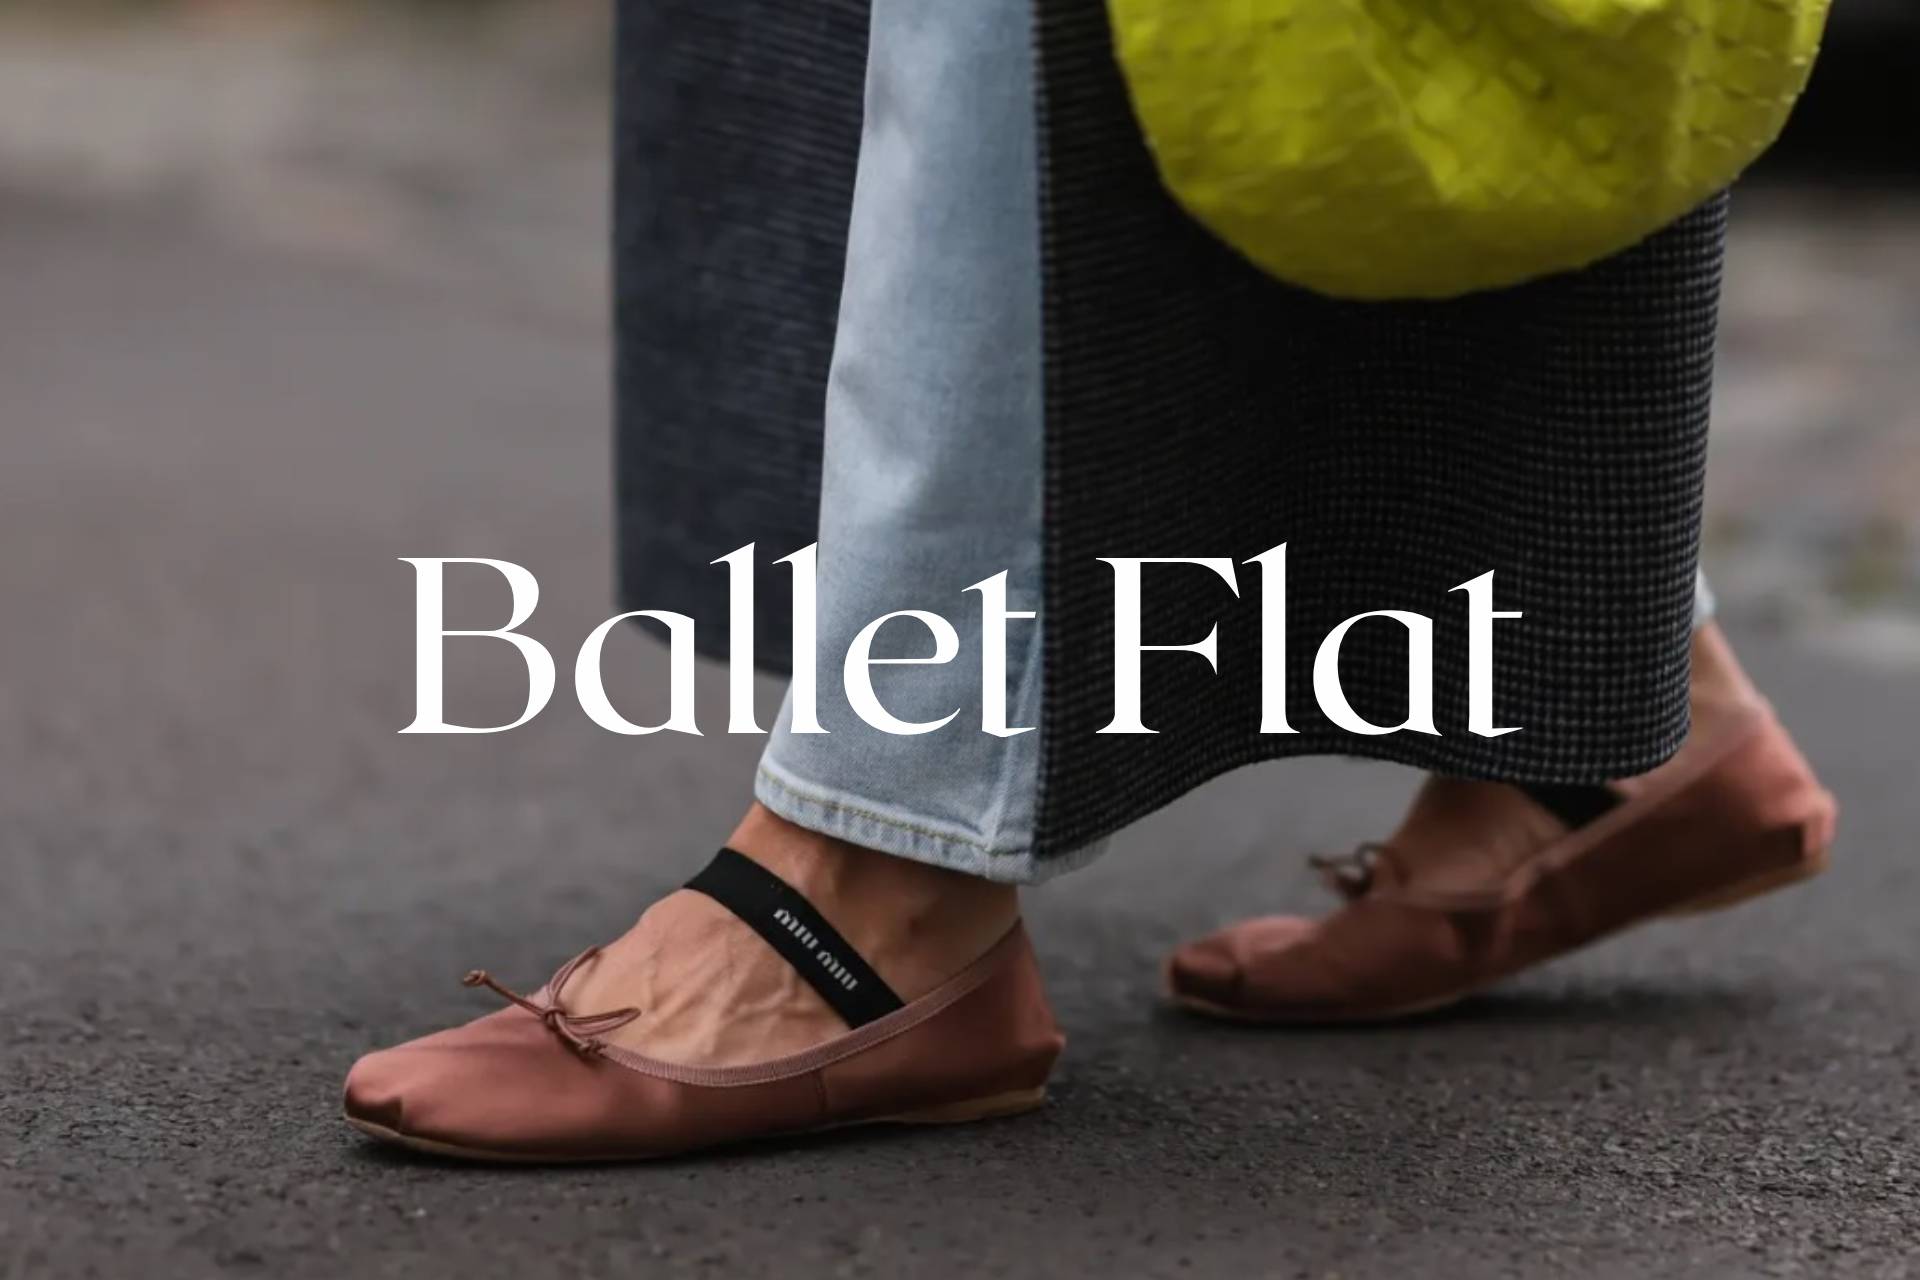 Ballet flats are back in fashion